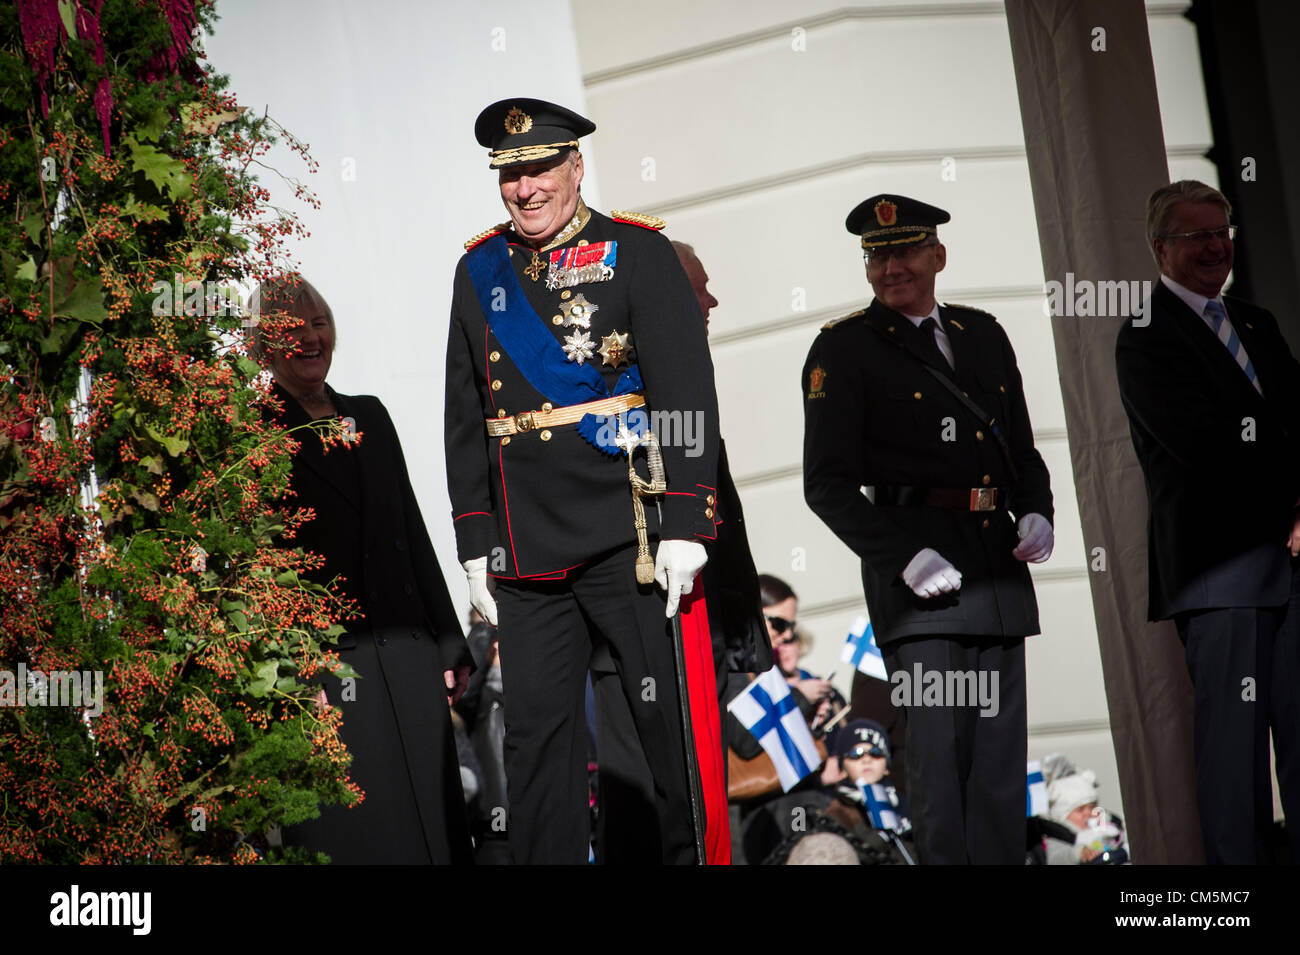 Oslo, Norway. 10/10/2012. The Norwegian King Harald smiles while waiting the Finnish President Sauli Niinsto outside the castle in Oslo. Stock Photo